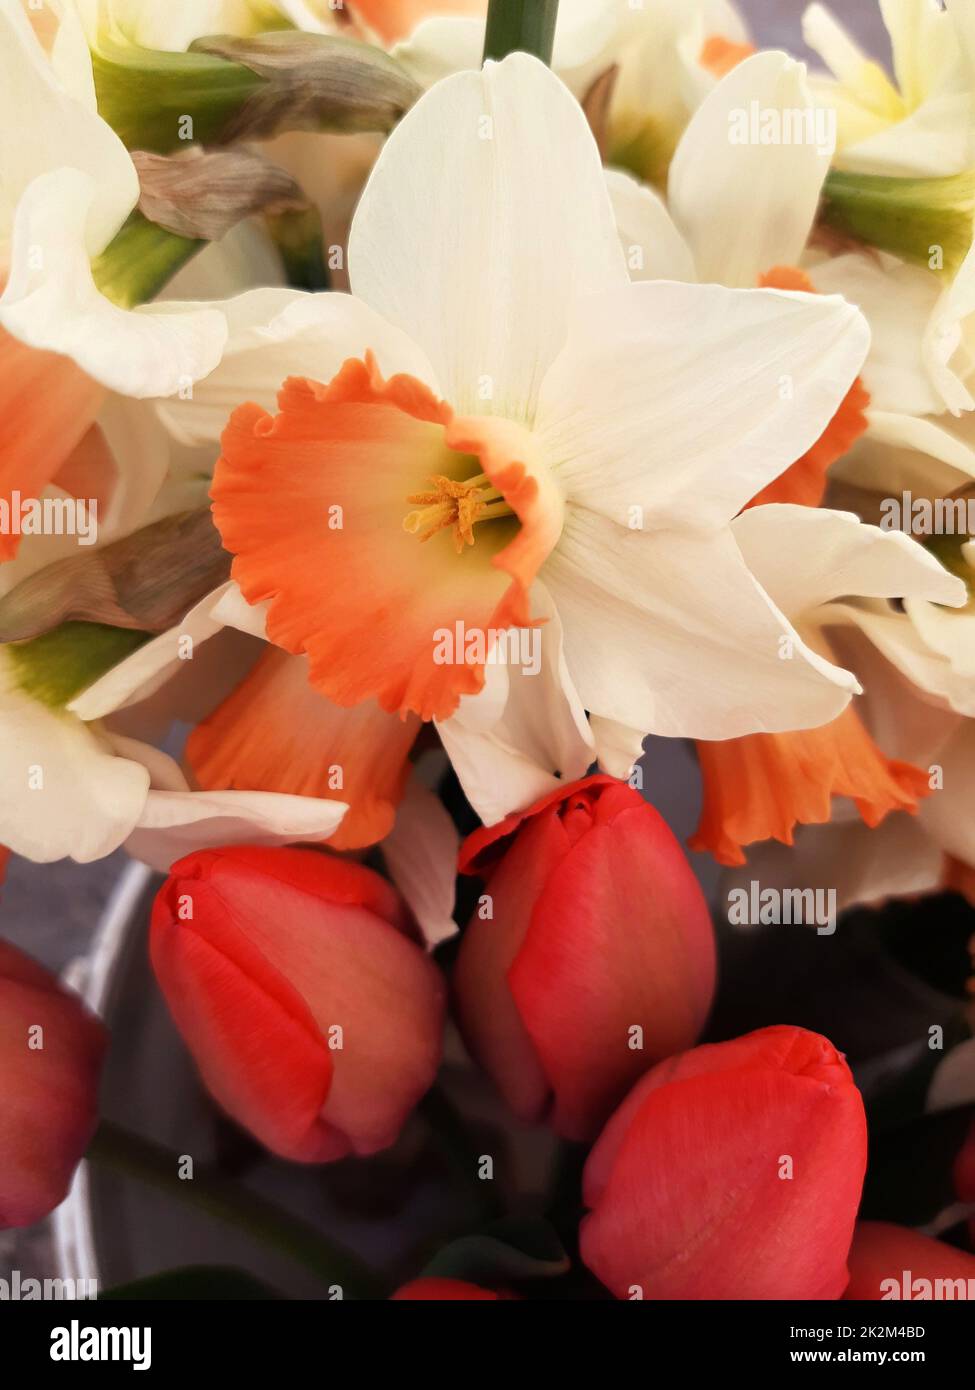 Daffodils and tulips close-up Stock Photo